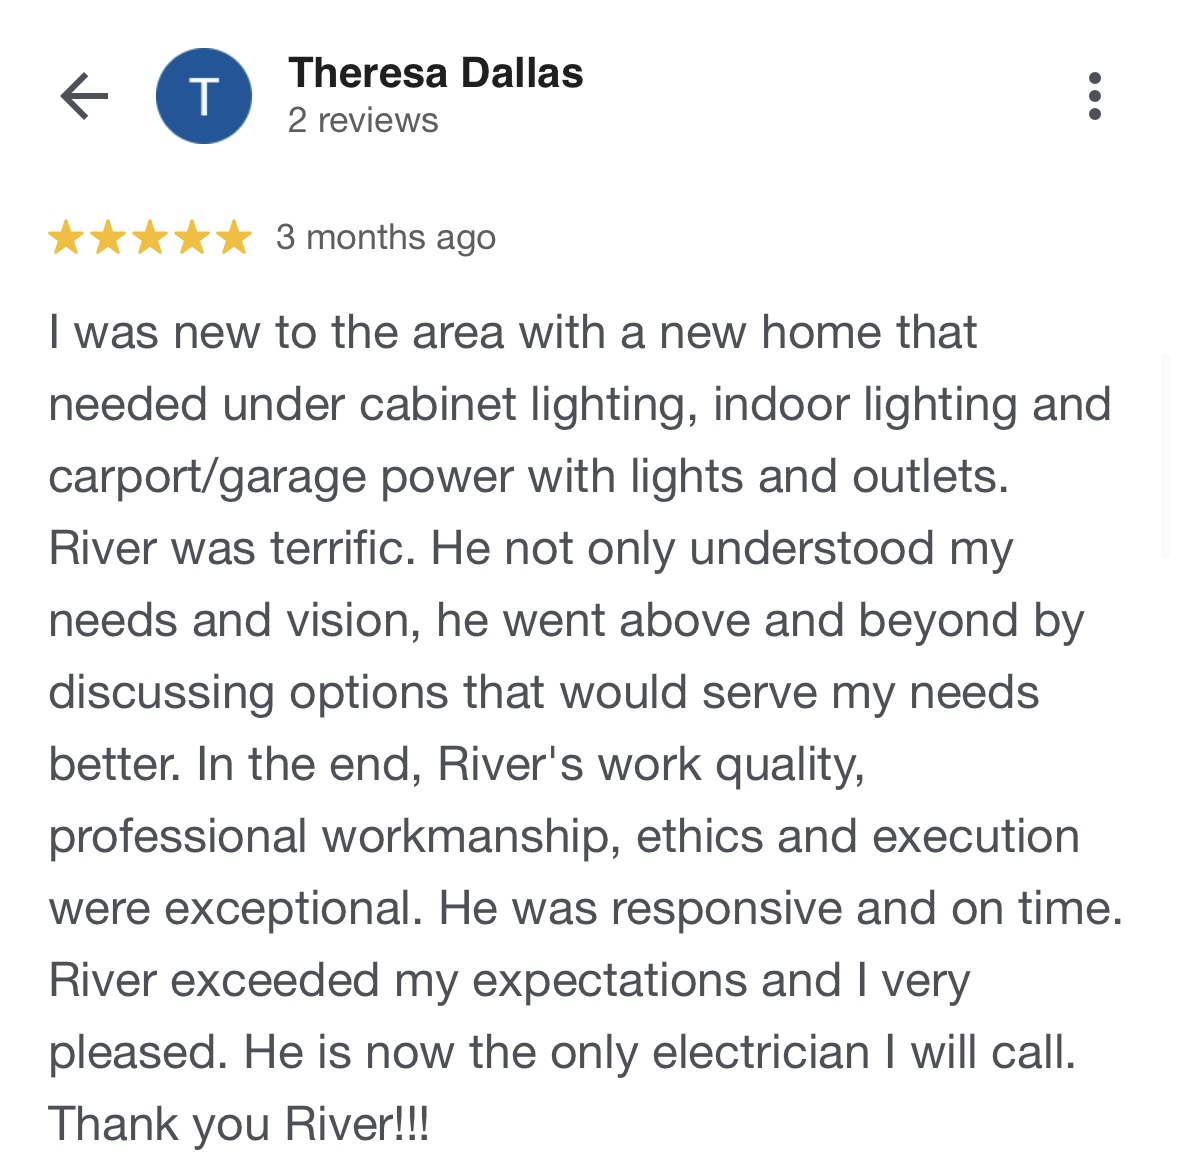 Customer Review 1